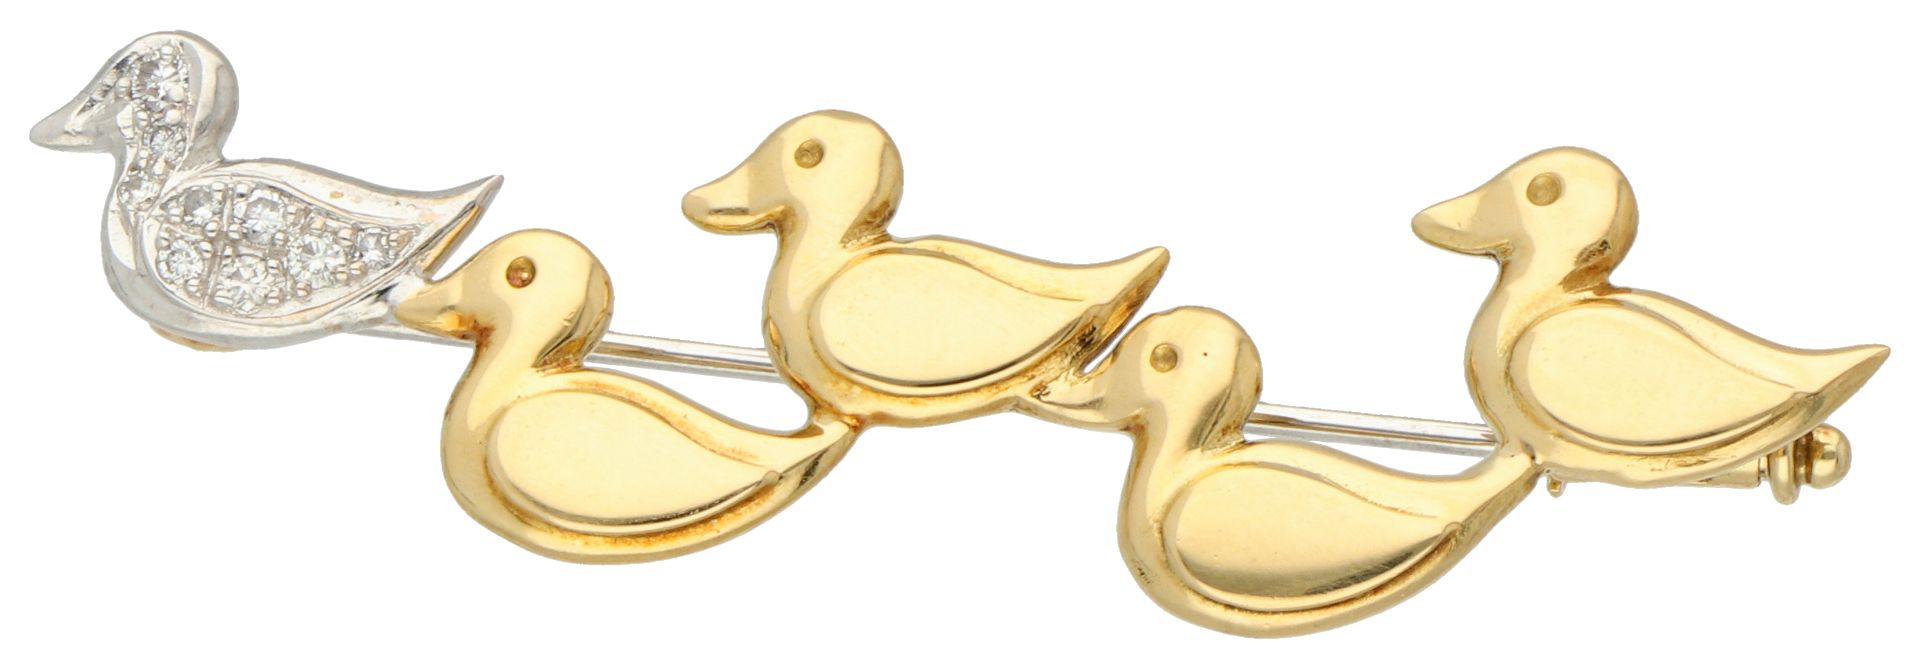 No reserve - 18K White gold brooch of five ducks set with approx. 0.06 ct. diamond.